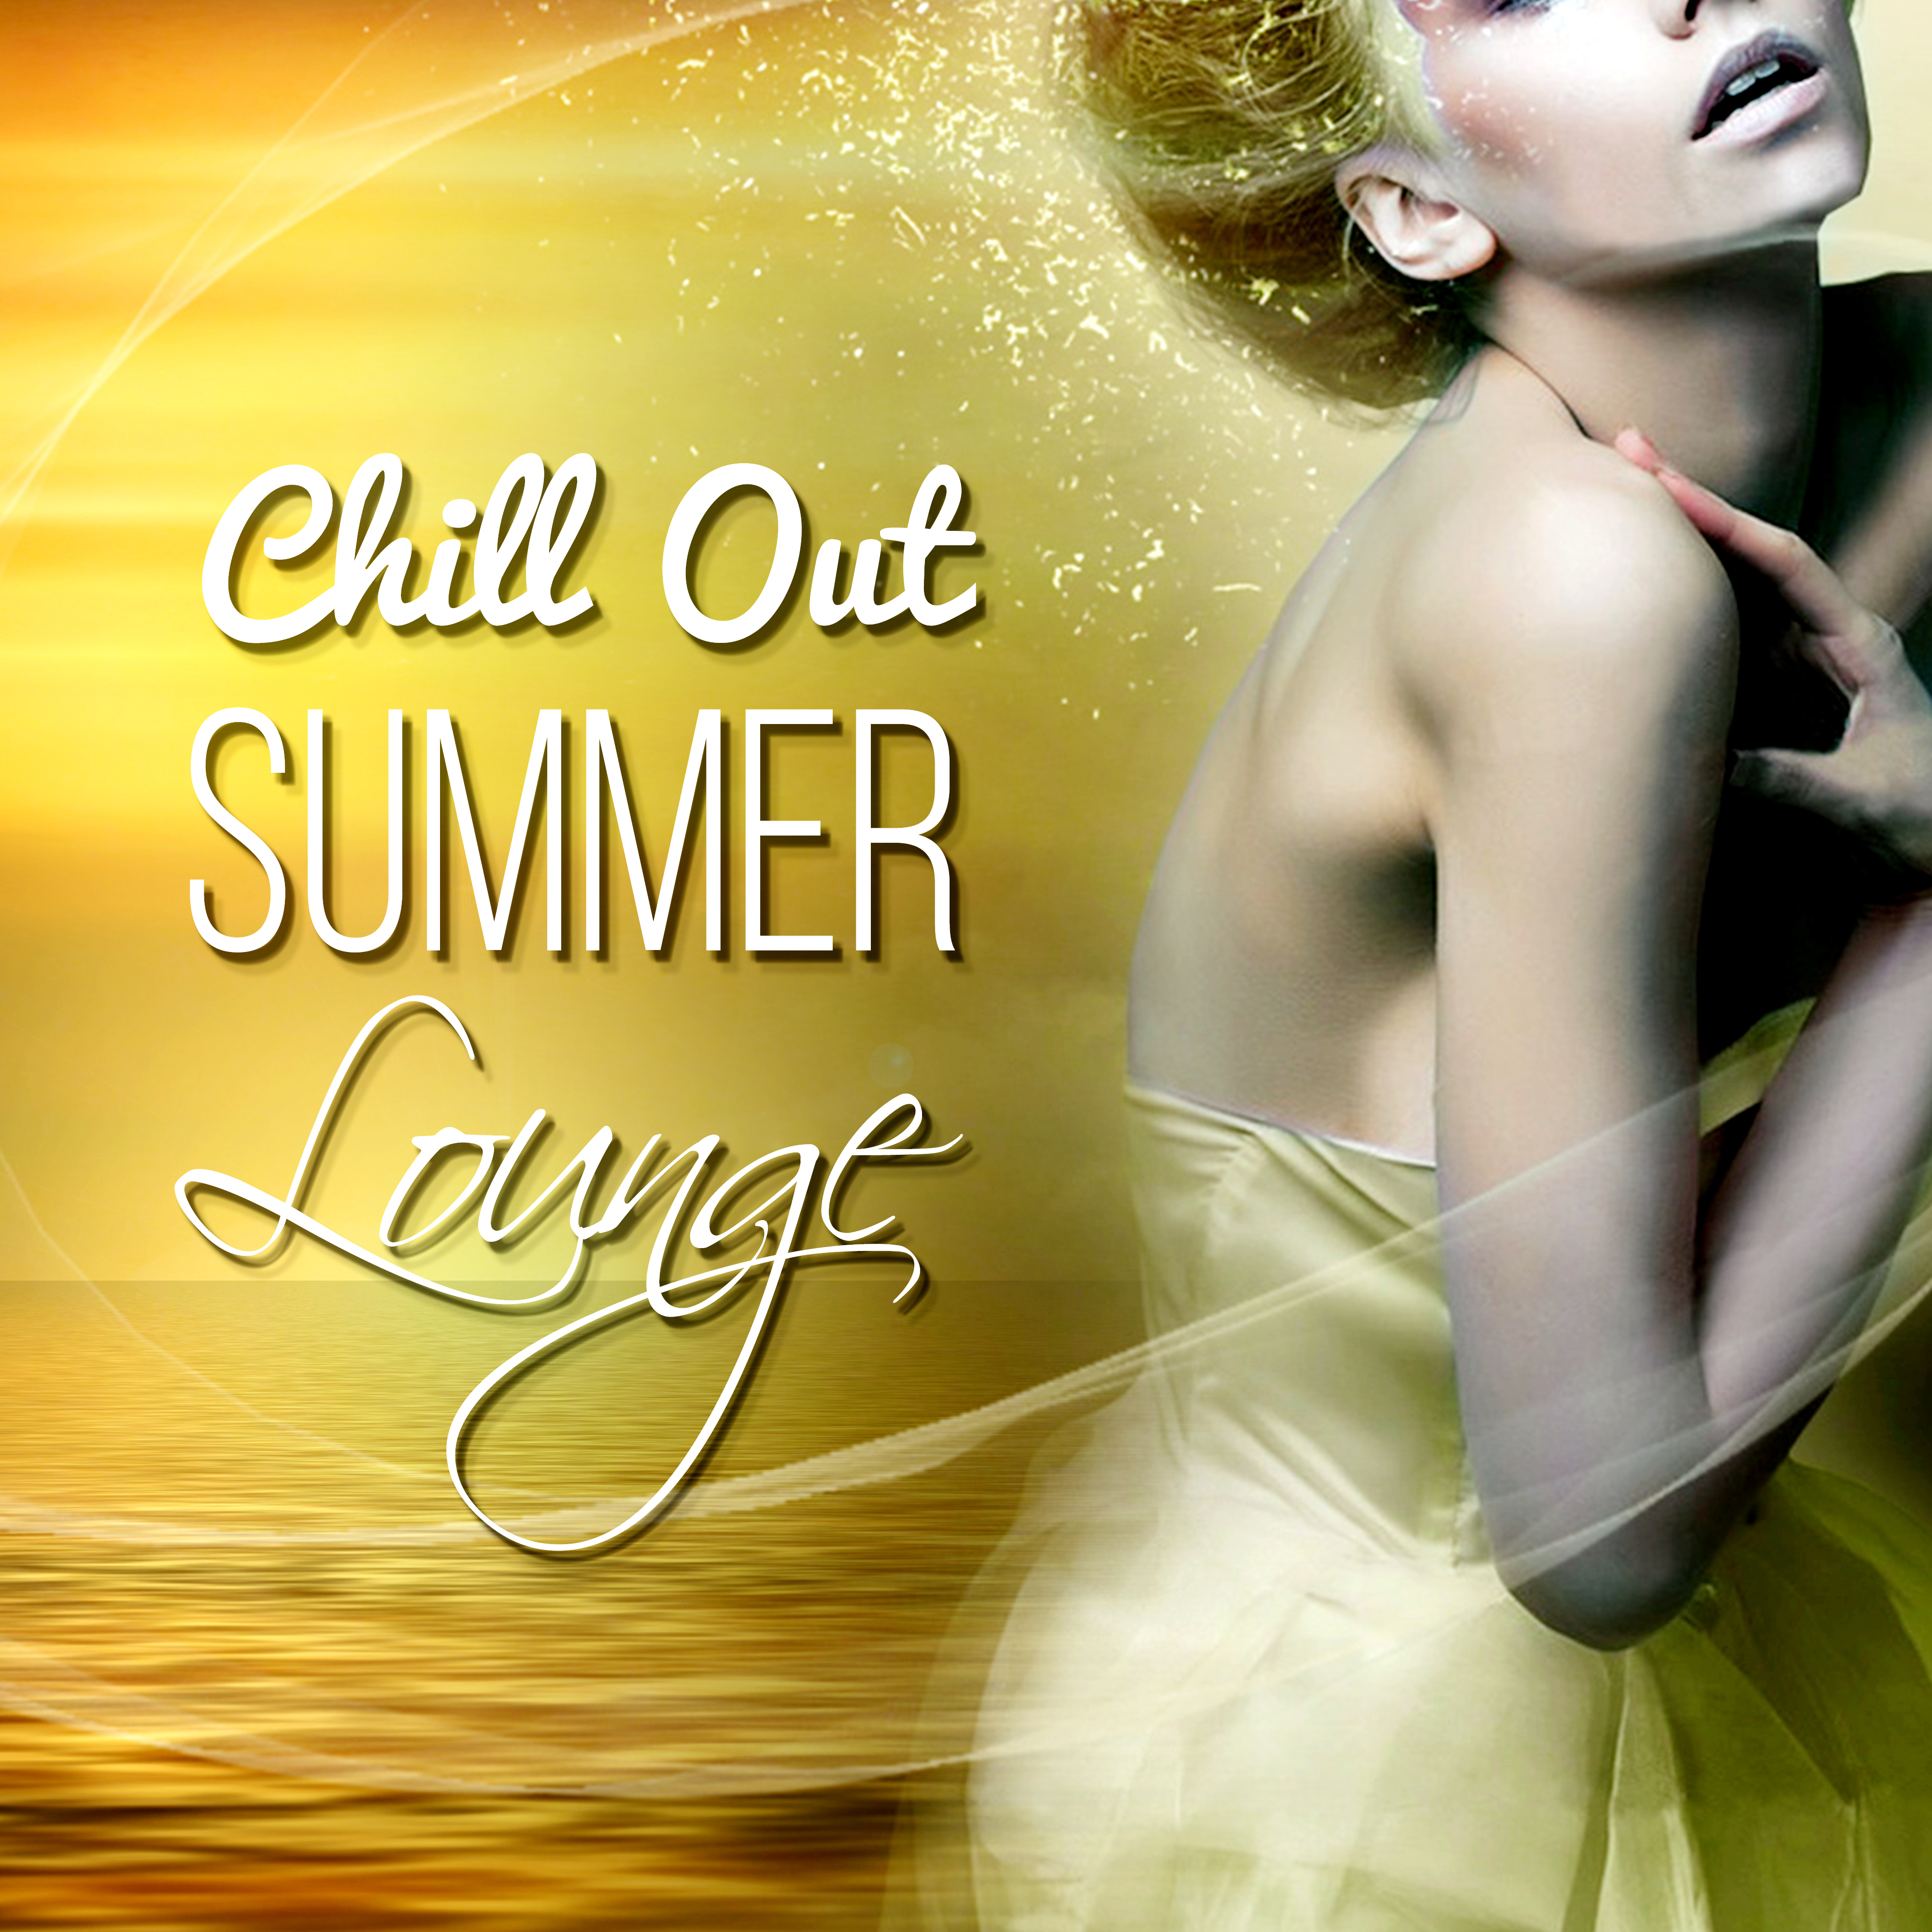 Chill Out Summer Lounge – Beach Café Lounge del Mar, Ultimate Sunset Beach Playlist, Ibiza Party, Drink Bar, Electronic Music, Belly Dance